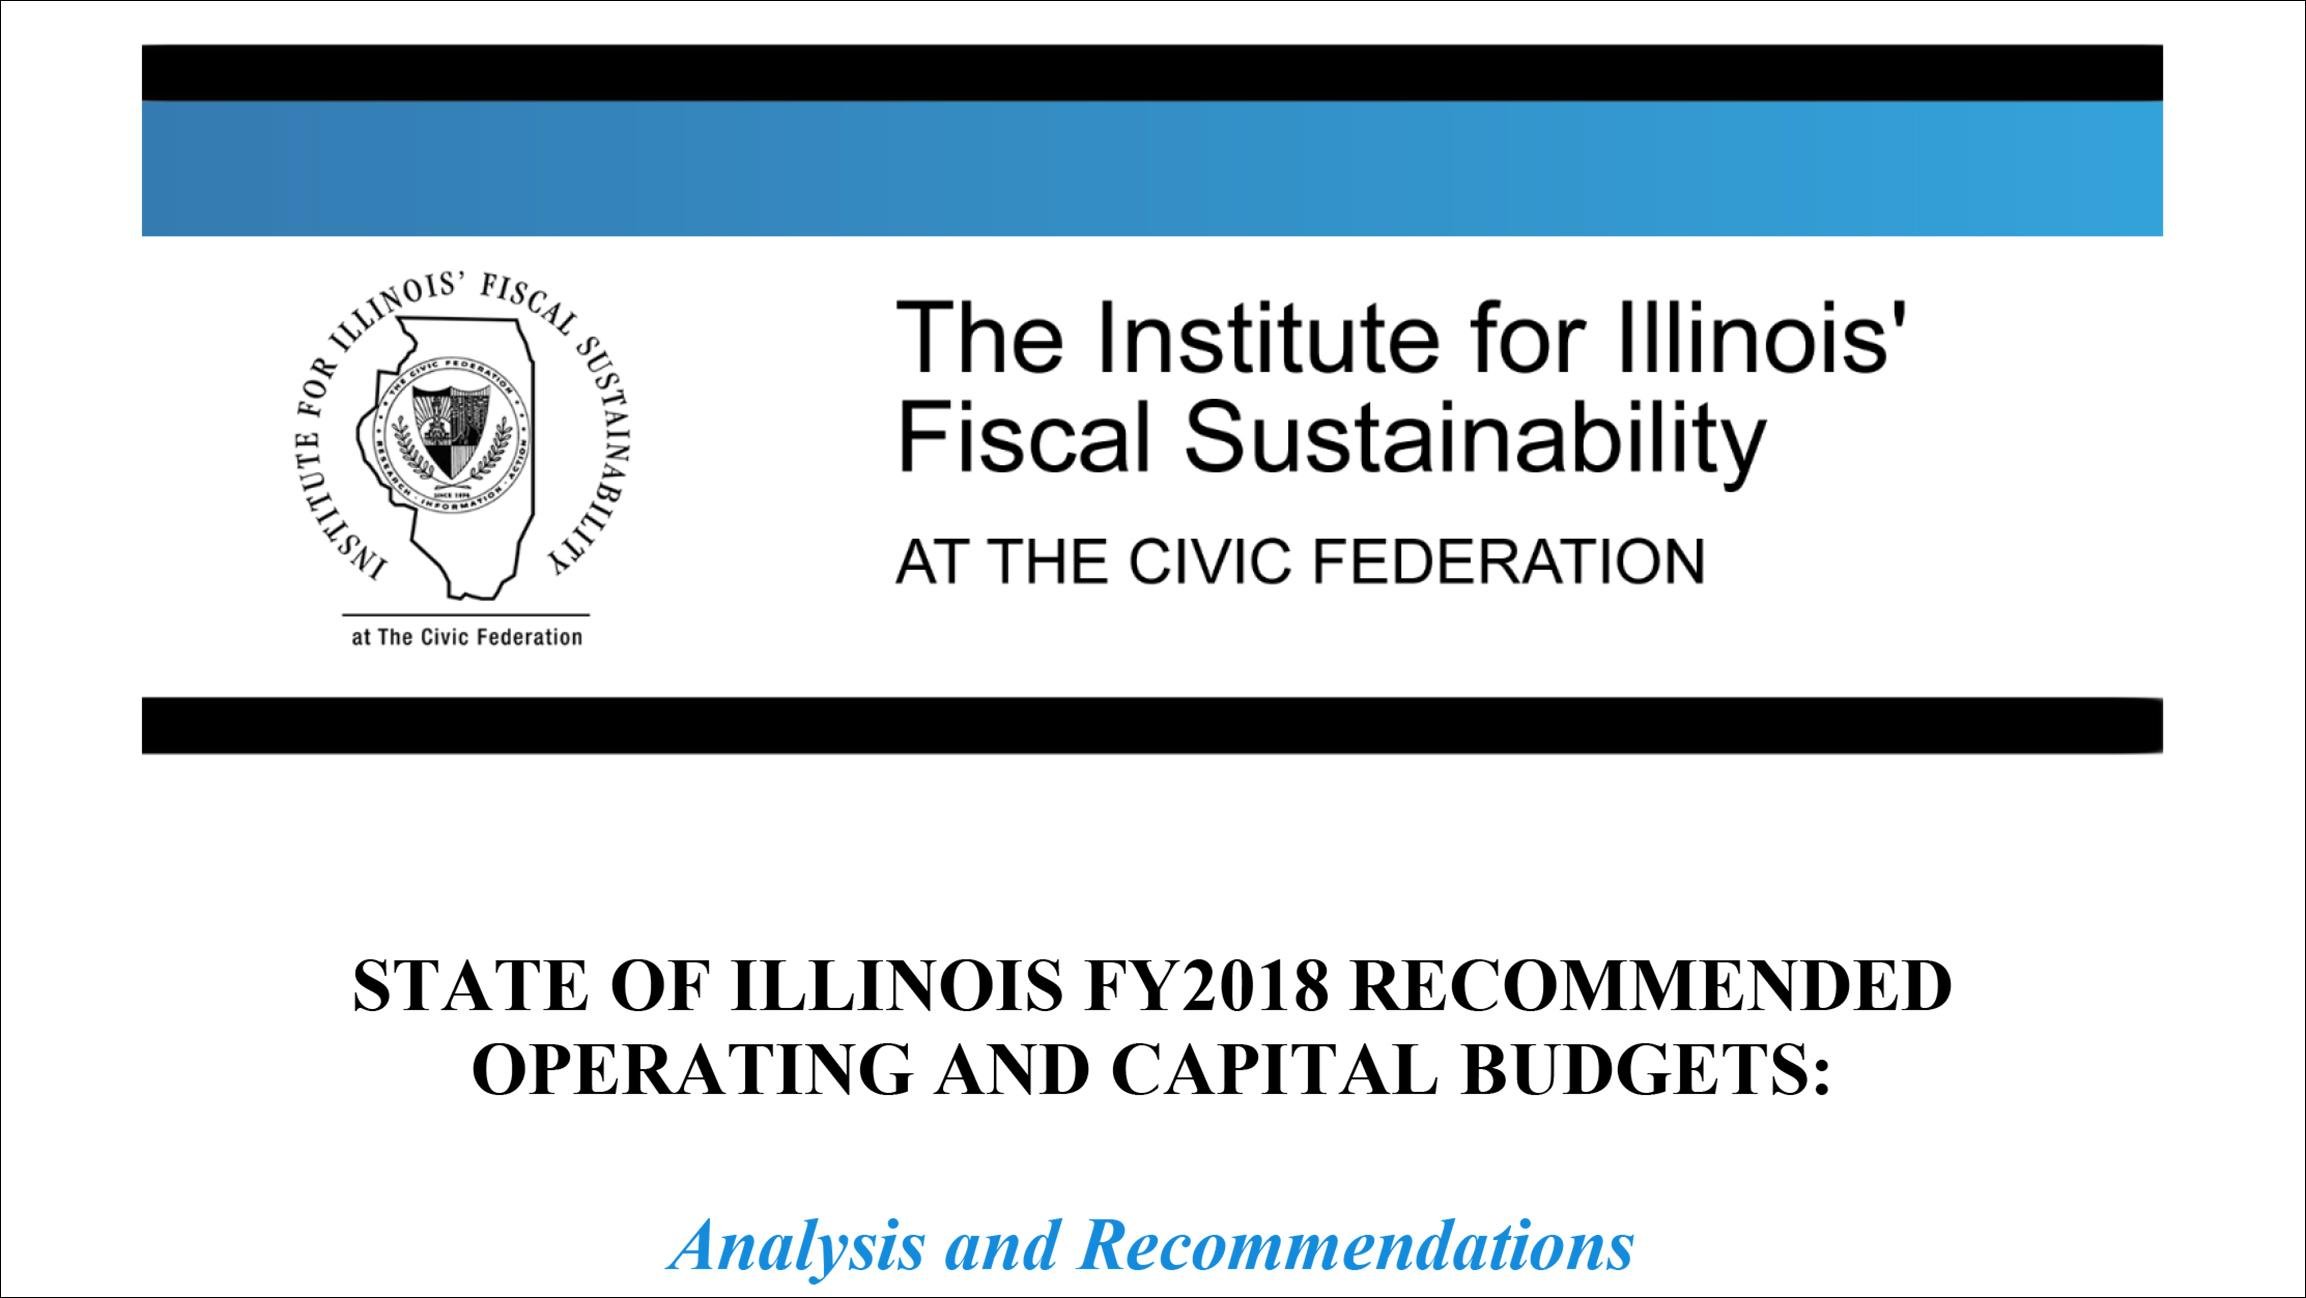 Document: Read the Civic Federation report